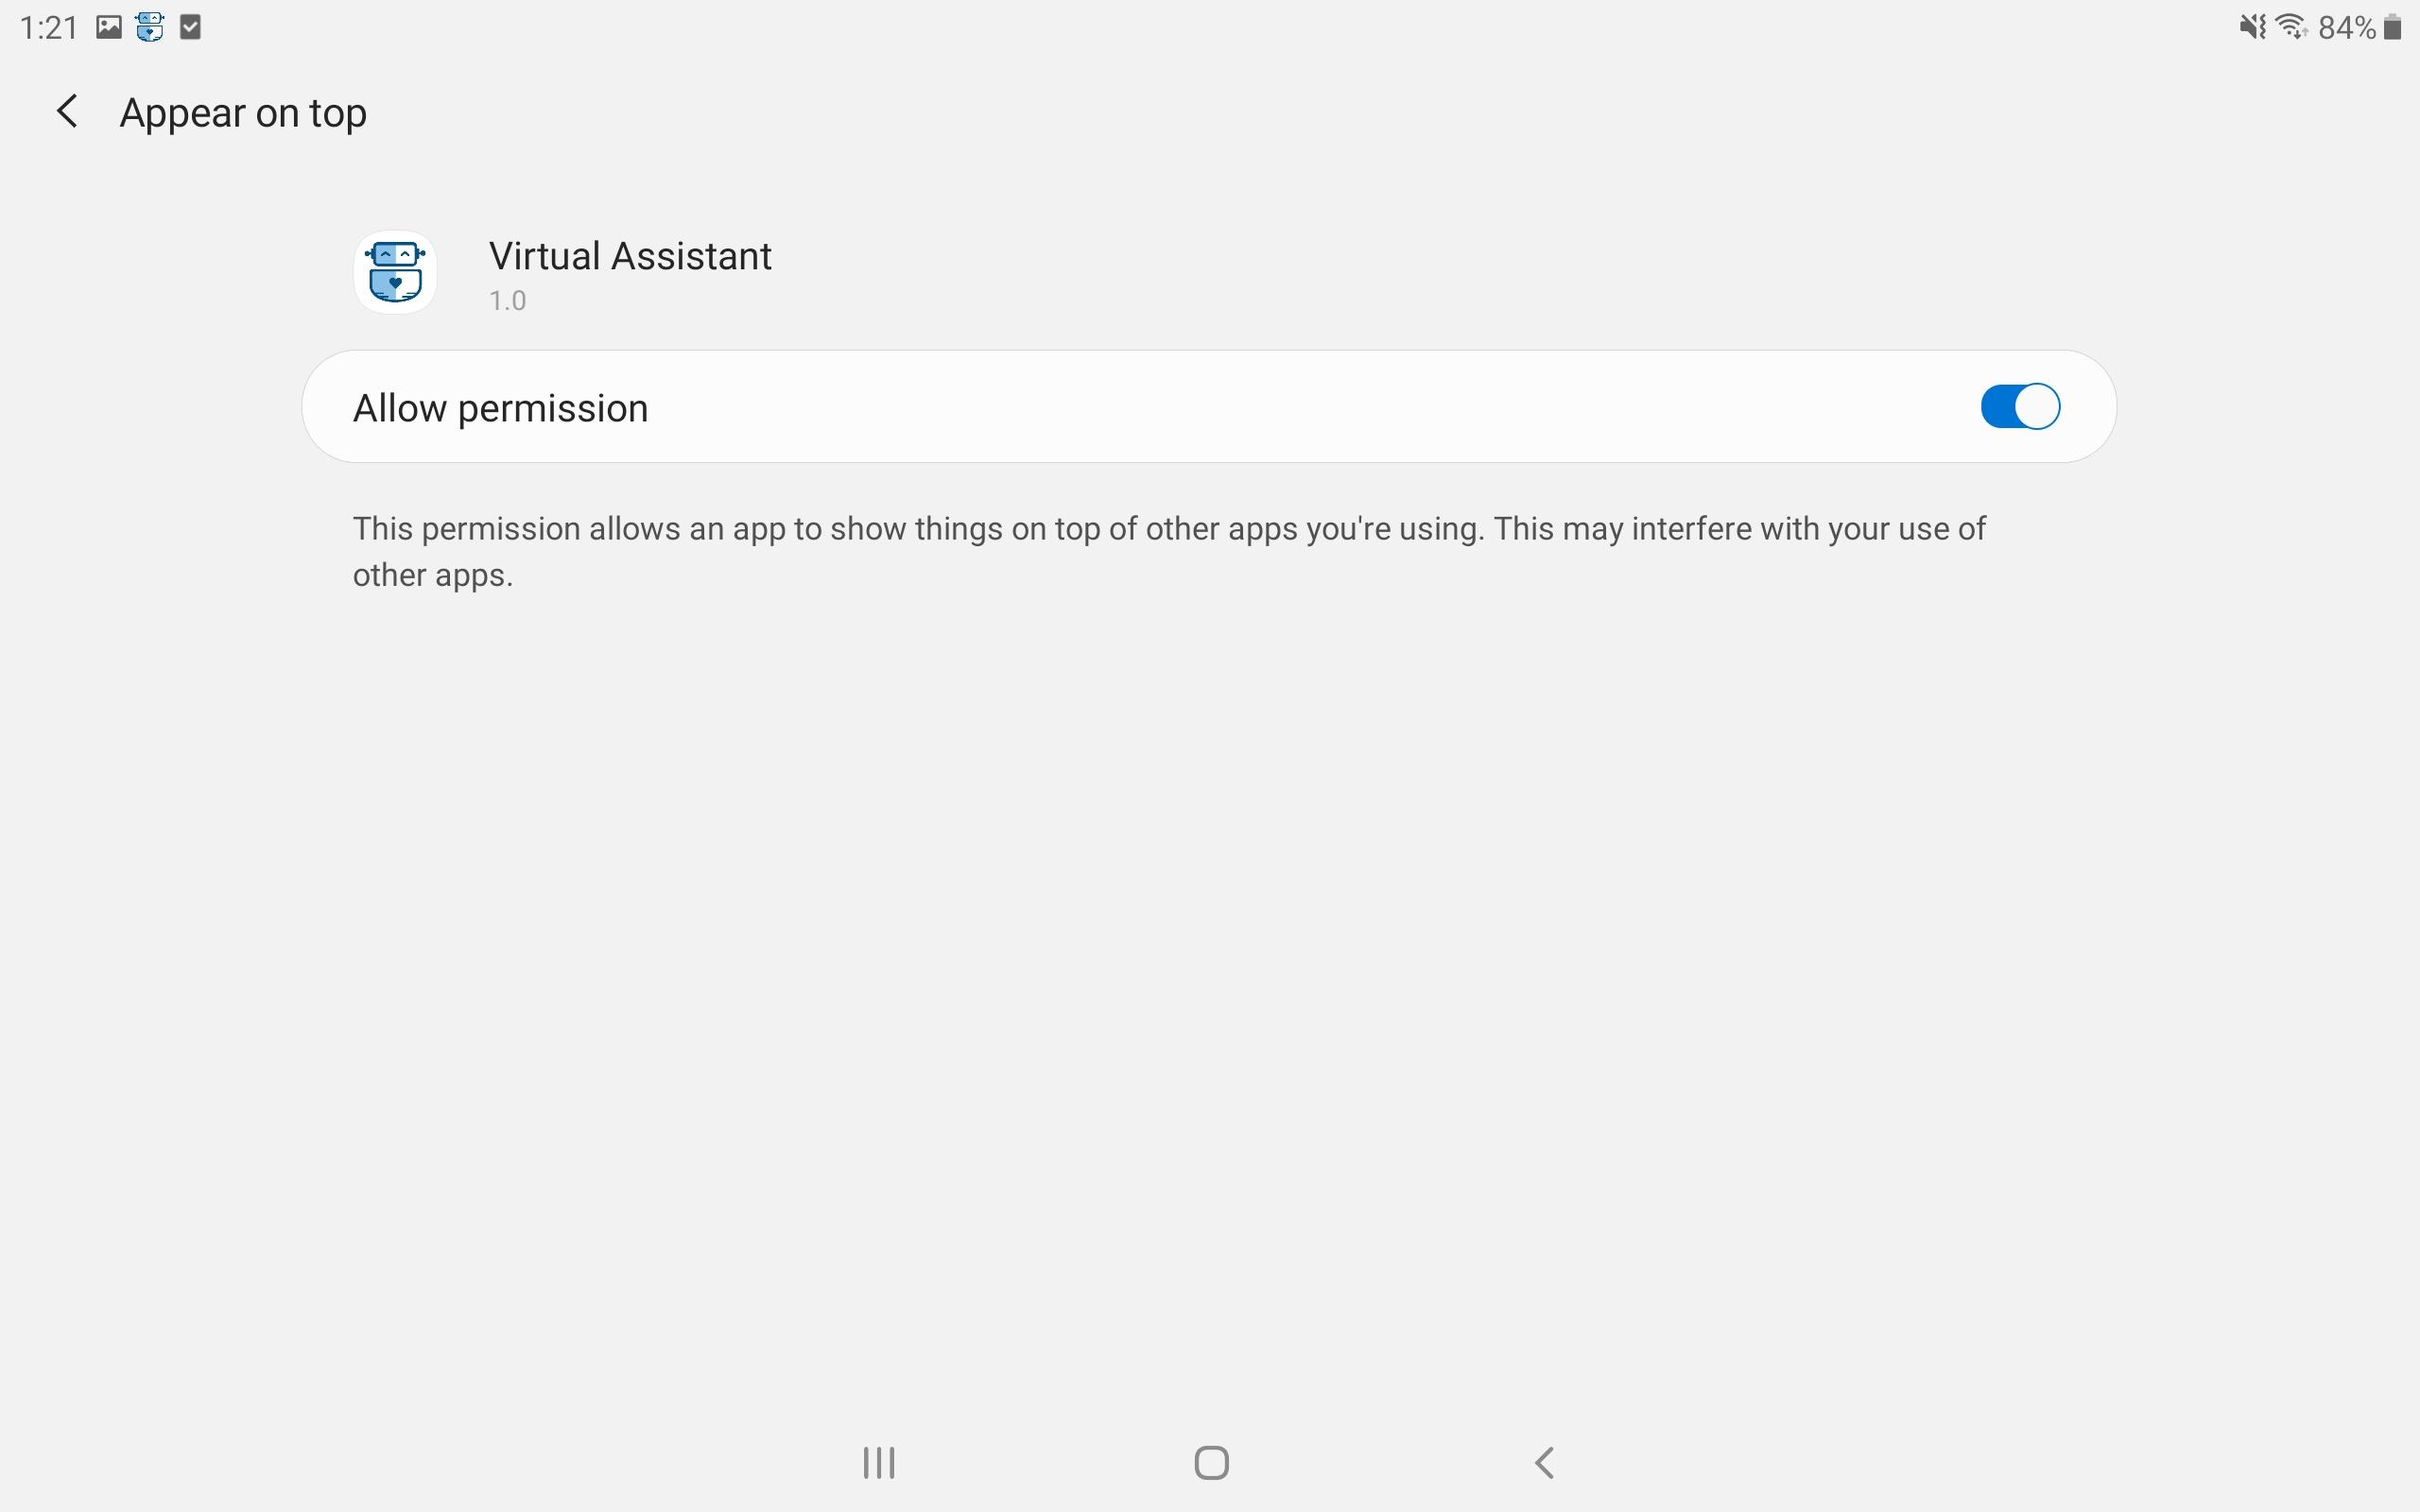 Virtual Assistant Client (Android) - Allow The Appear On Top Permission In Settings